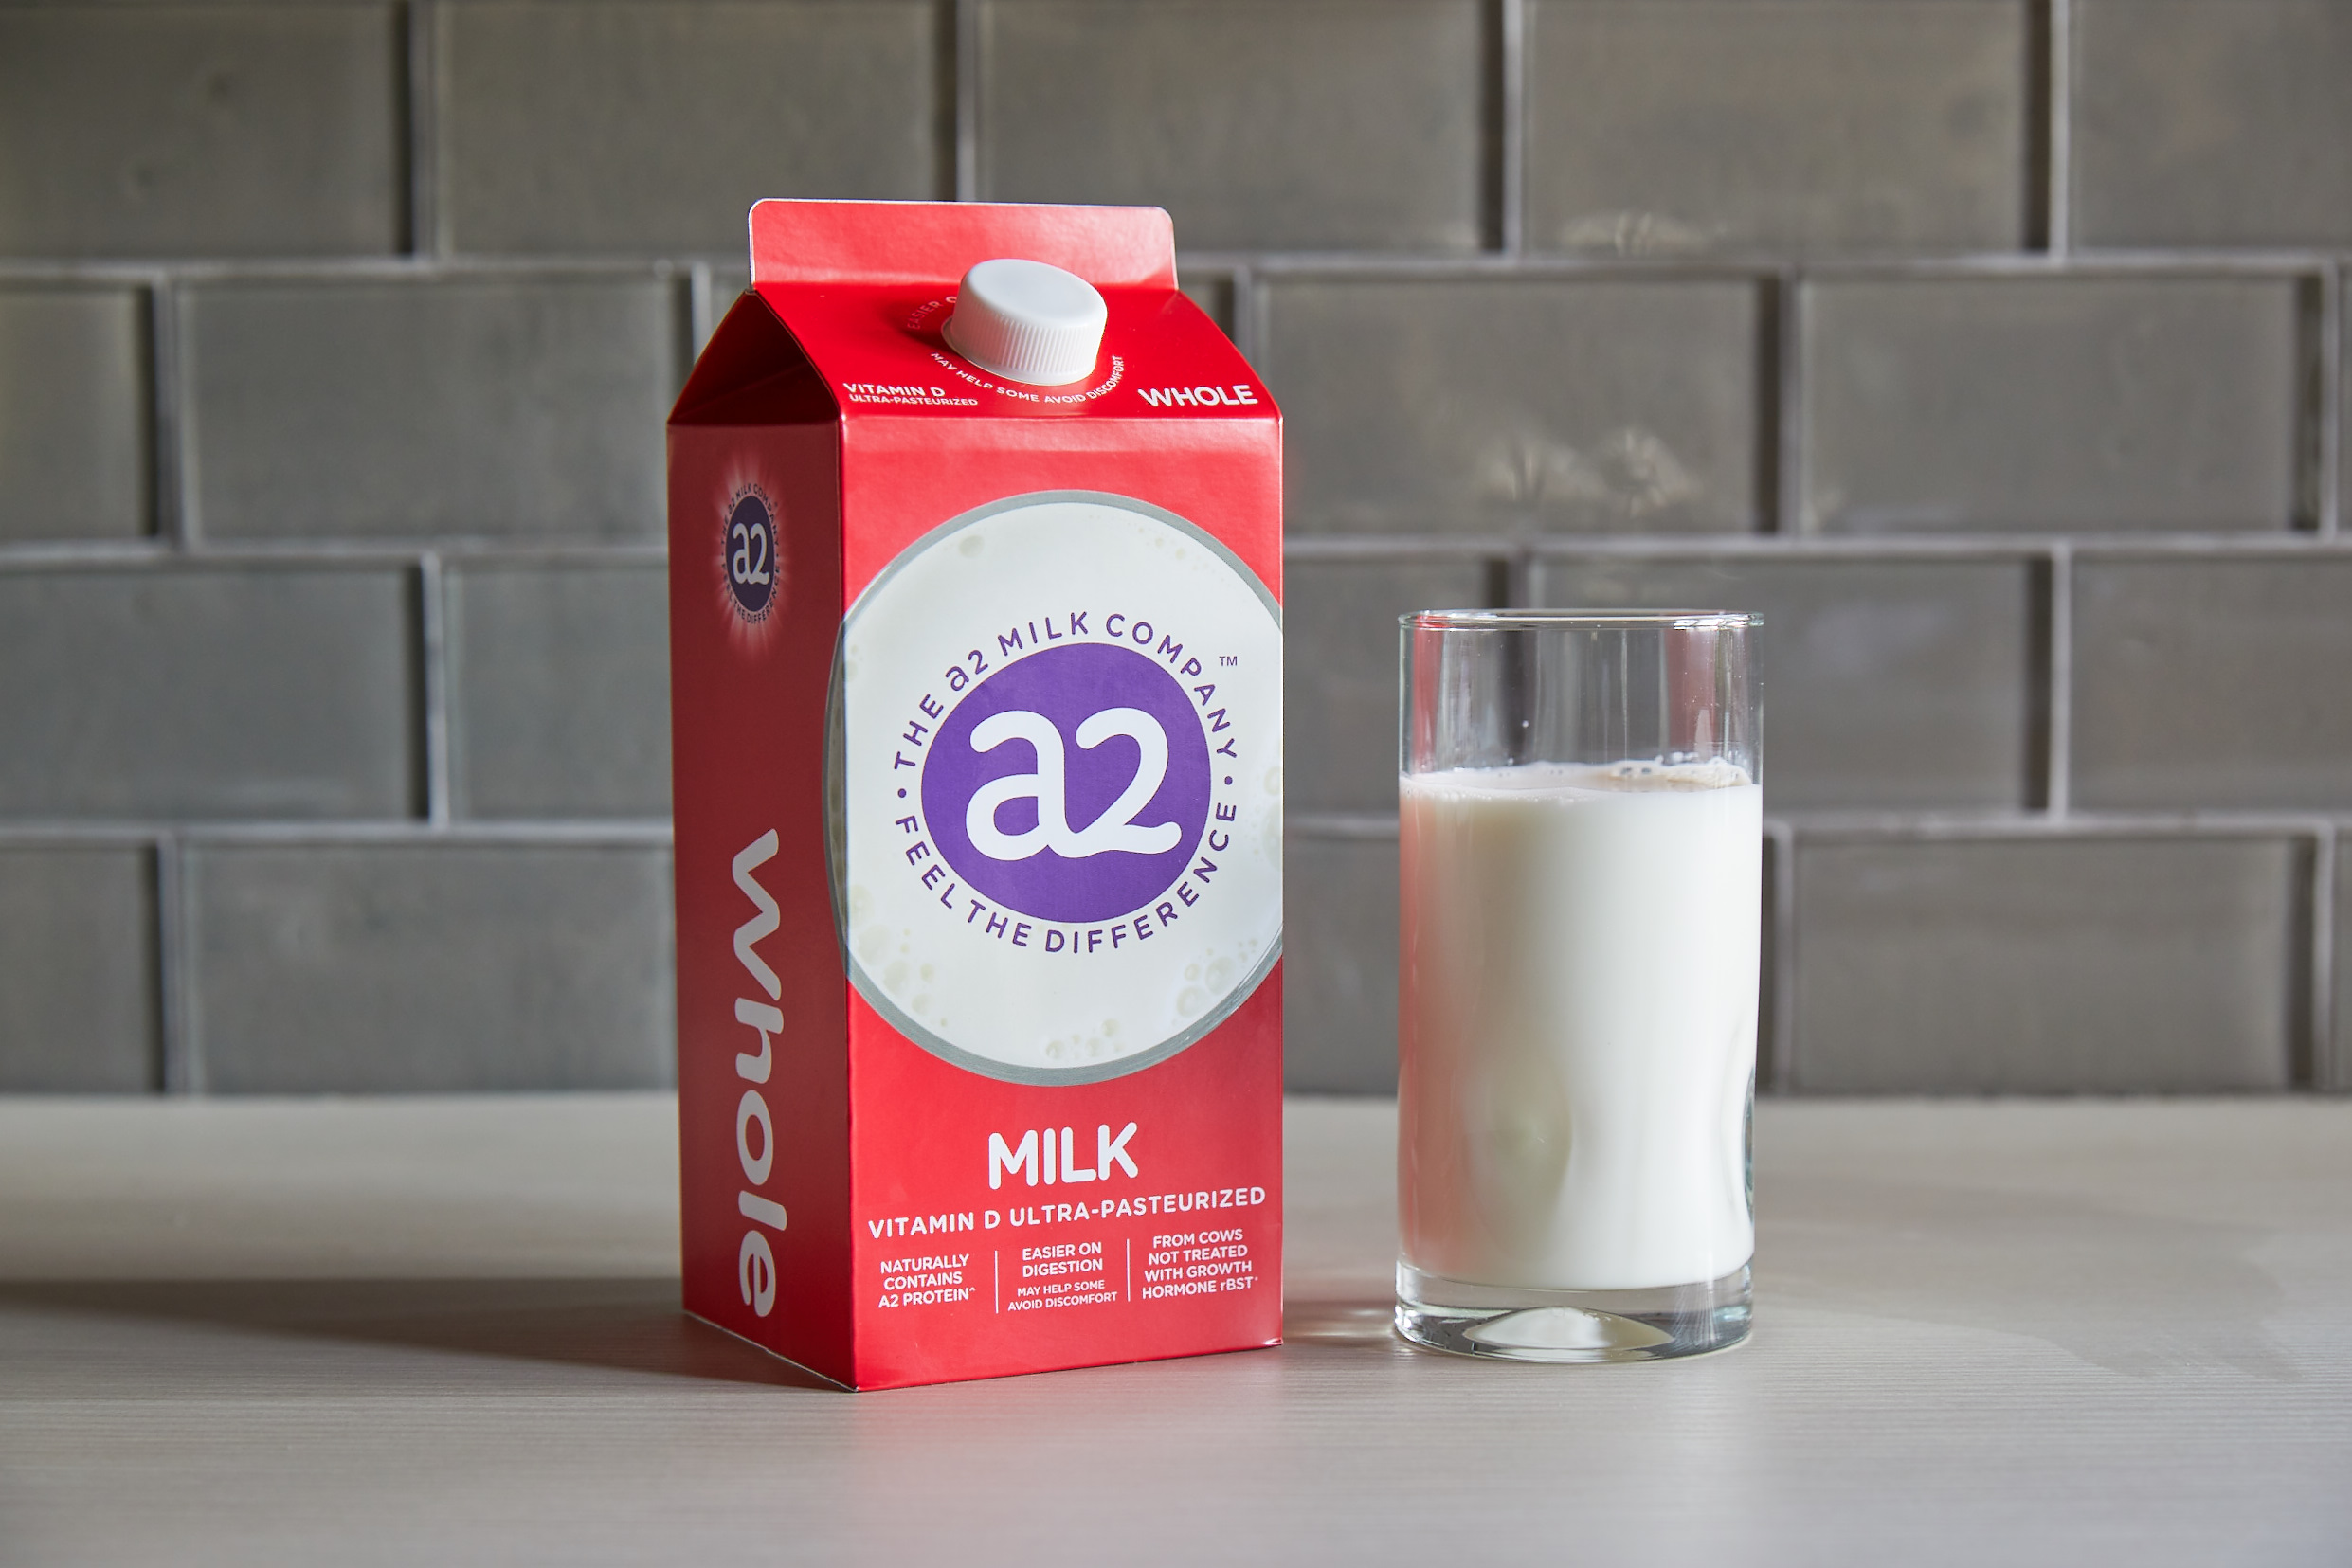 Consumers can find a2 Milk® at over 20,000 stores nationwide, including Target, Albertsons/Safeway, Publix, Kroger, Sprouts Farmers Market, Whole Foods Market, as well as select Costco and Walmart stores.